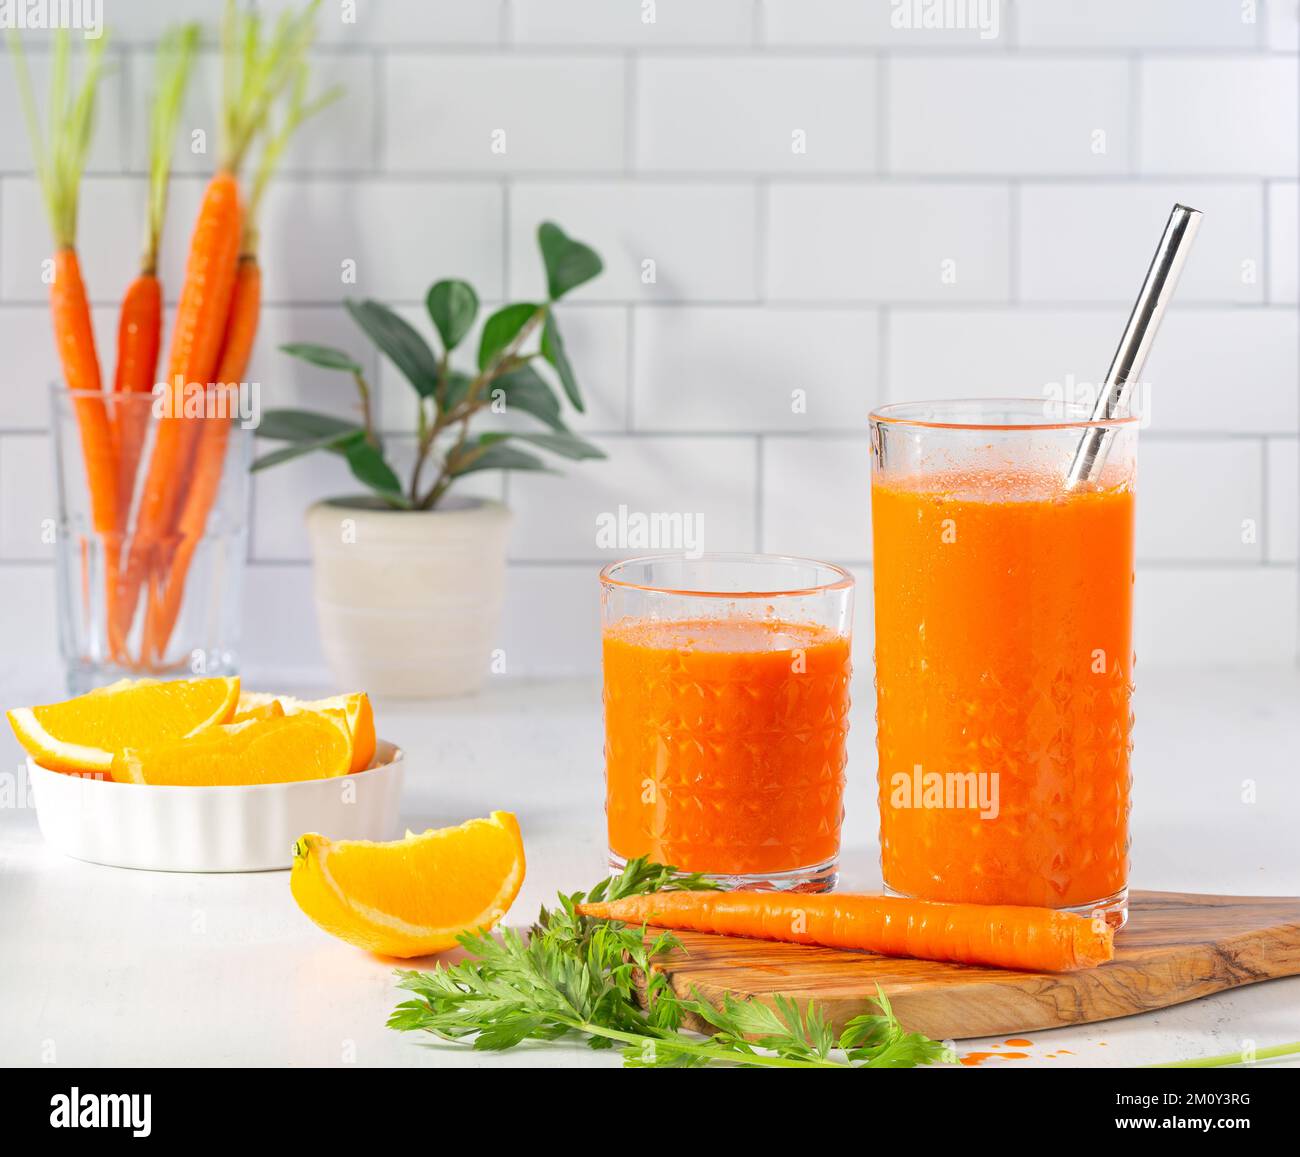 Two healthy and delicious glasses of carrot juice in a light and bright kitchen counter scene with copy space Stock Photo